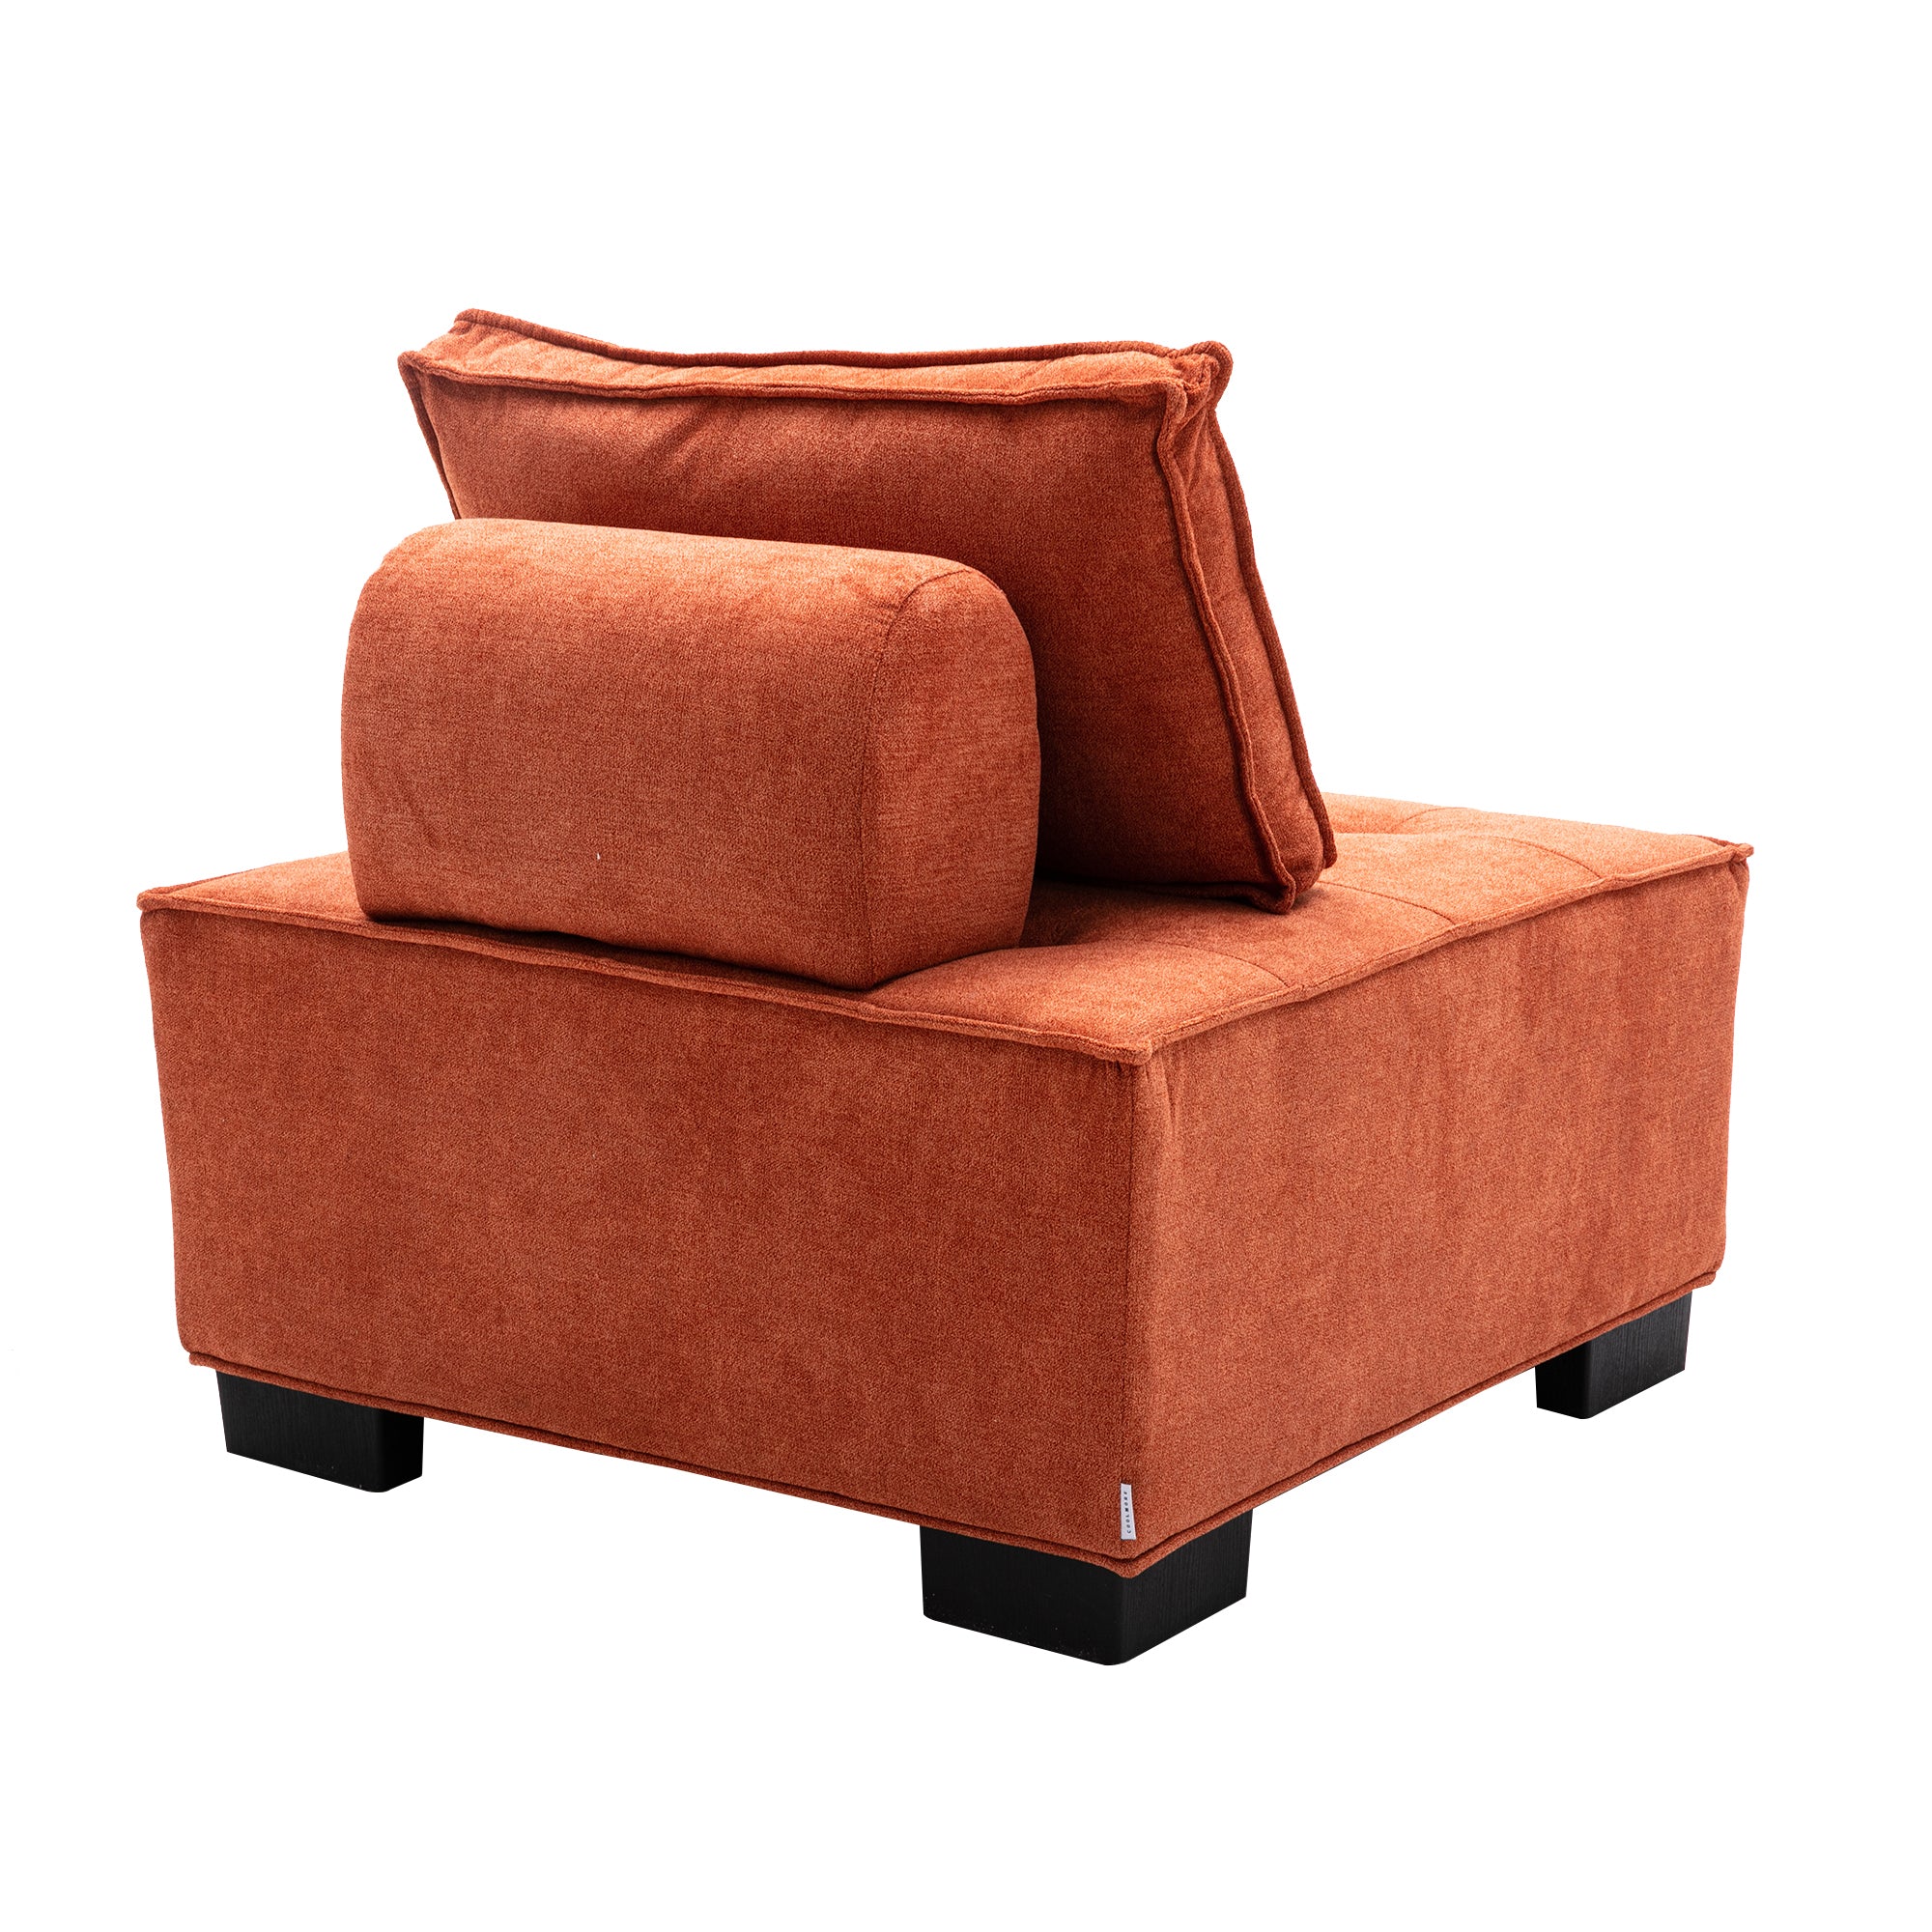 COOMORE LIVING ROOM OTTOMAN LAZY CHAIR orange-polyester